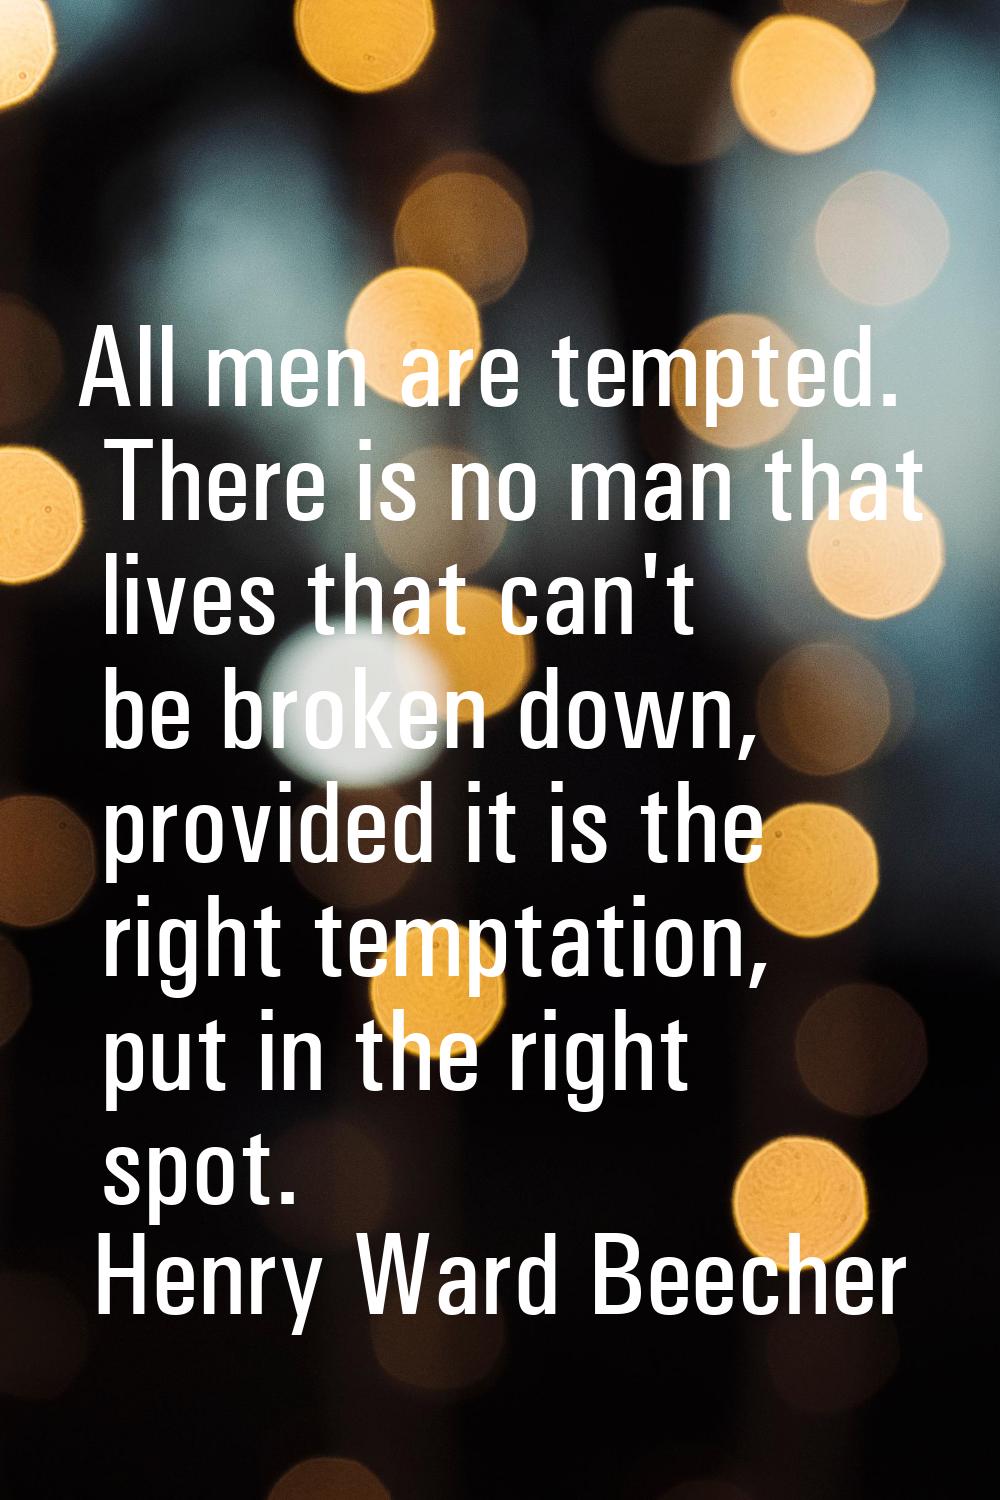 All men are tempted. There is no man that lives that can't be broken down, provided it is the right